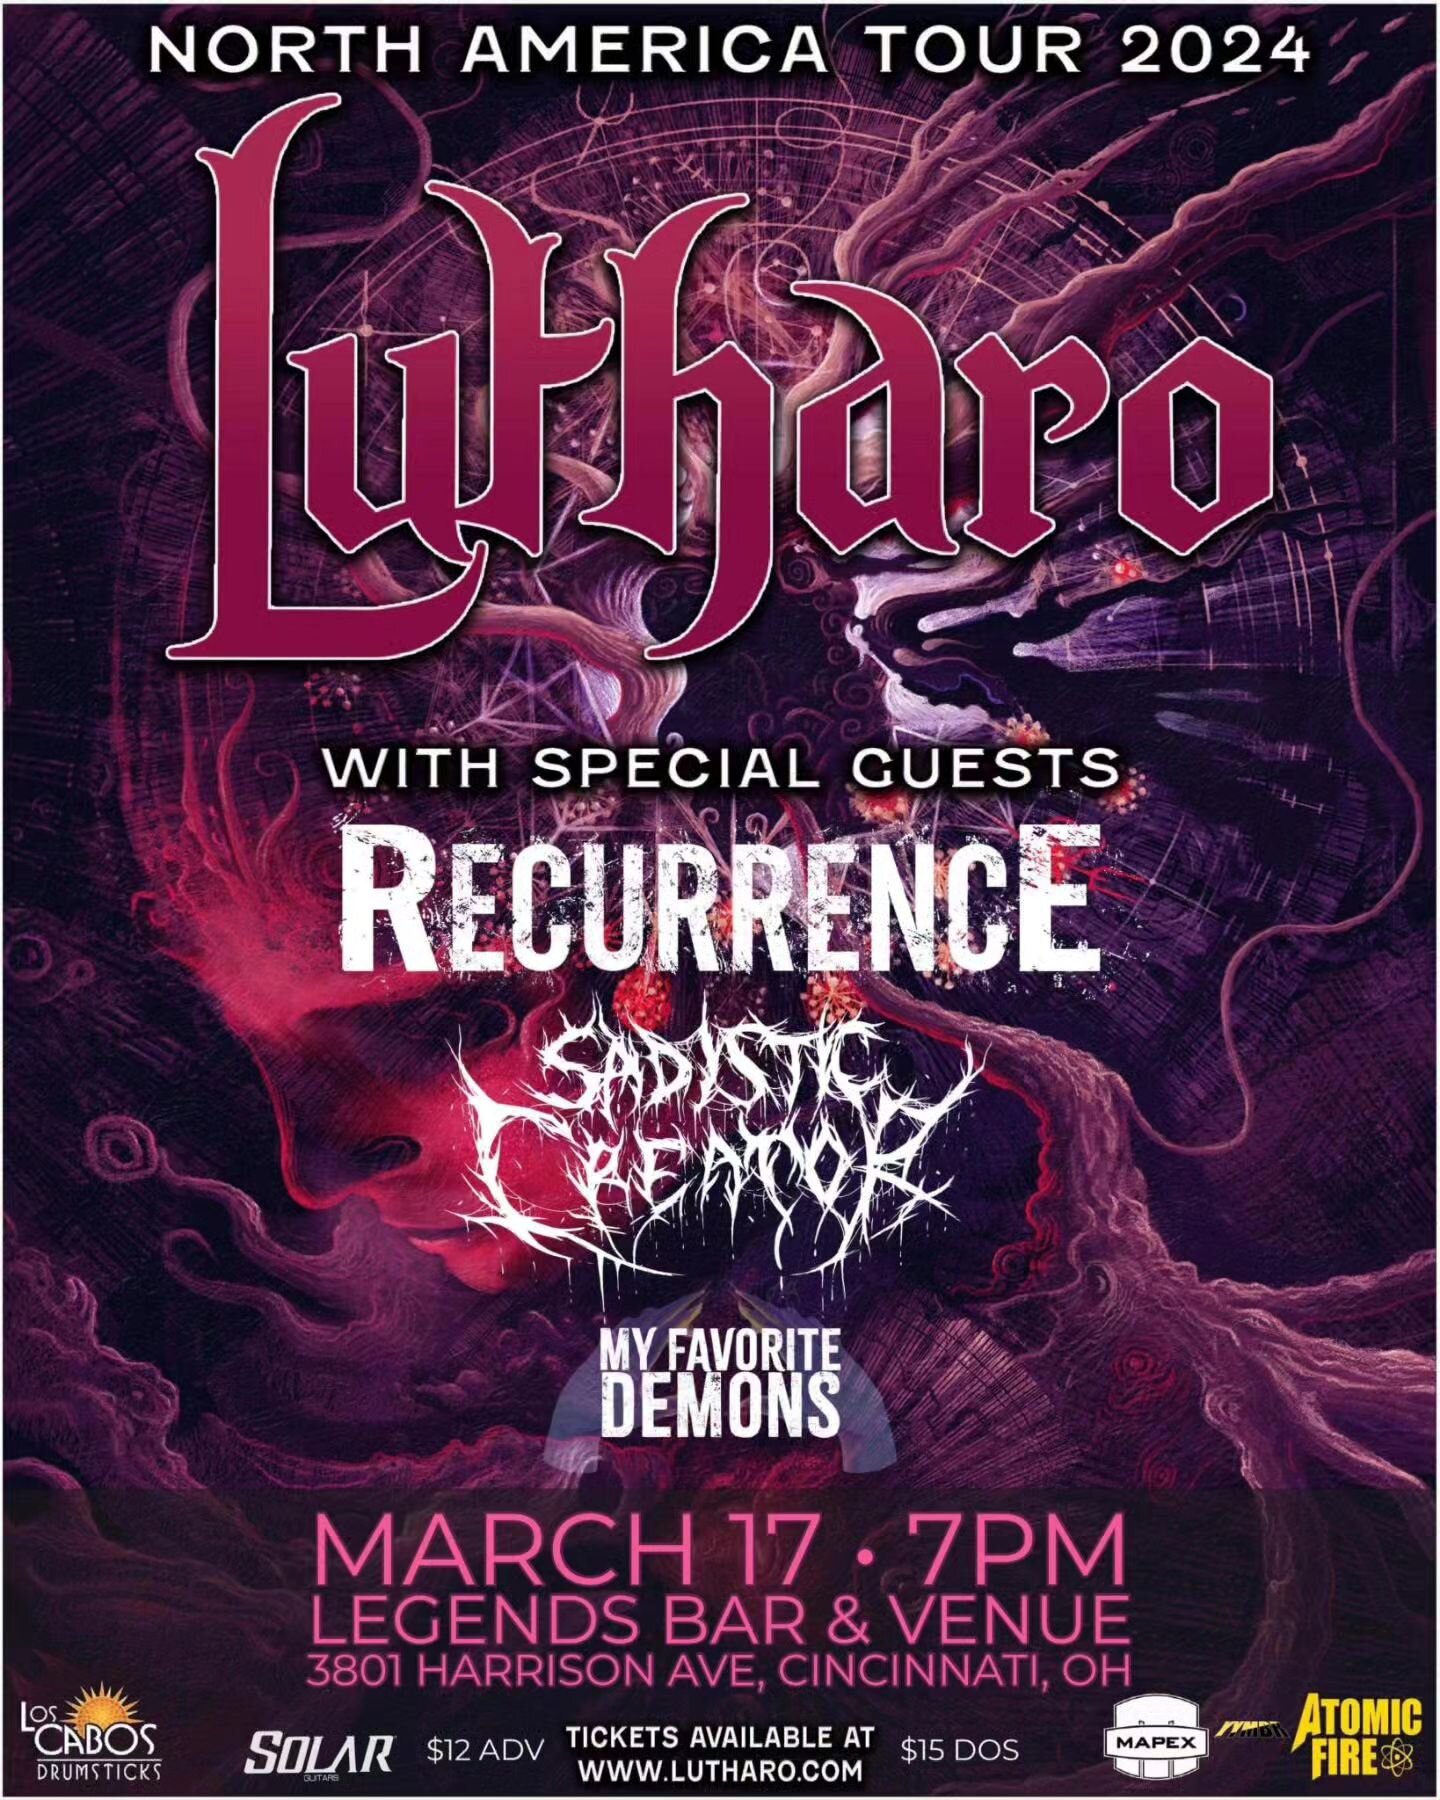 We are excited to announce we will be opening for @lutharo_official at @legendsbar513 on Sunday March 17th! Also performing are @sadisticcreator and our friends in @myfavoritedemonsband so you don't wanna miss this awesome show!
🔄
Tickets available 